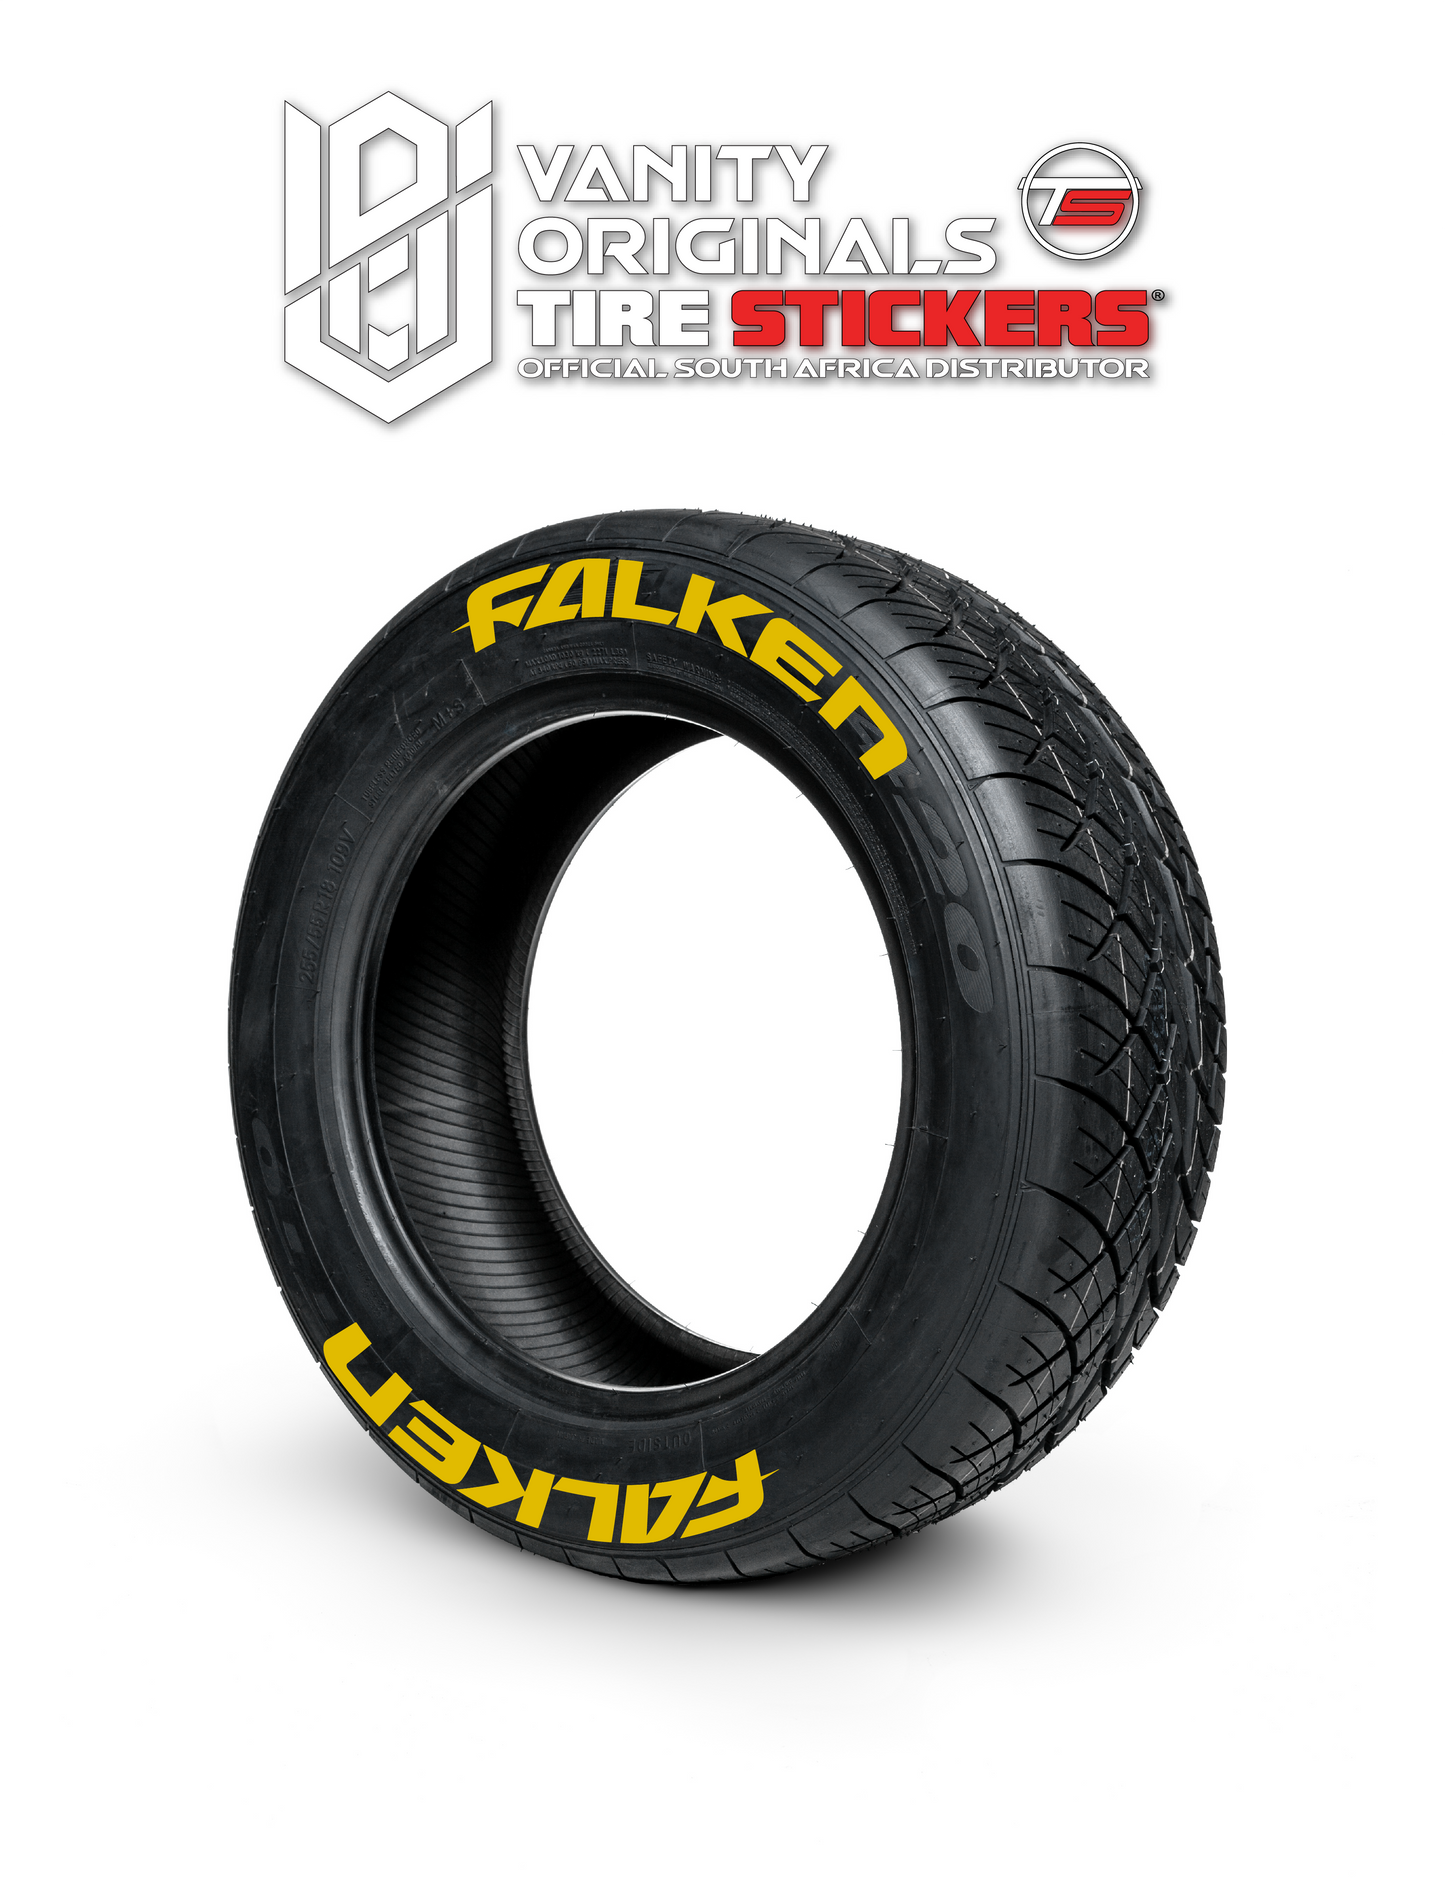 Falken ( 8x Rubber Decals, Adhesive & Instructions Included )